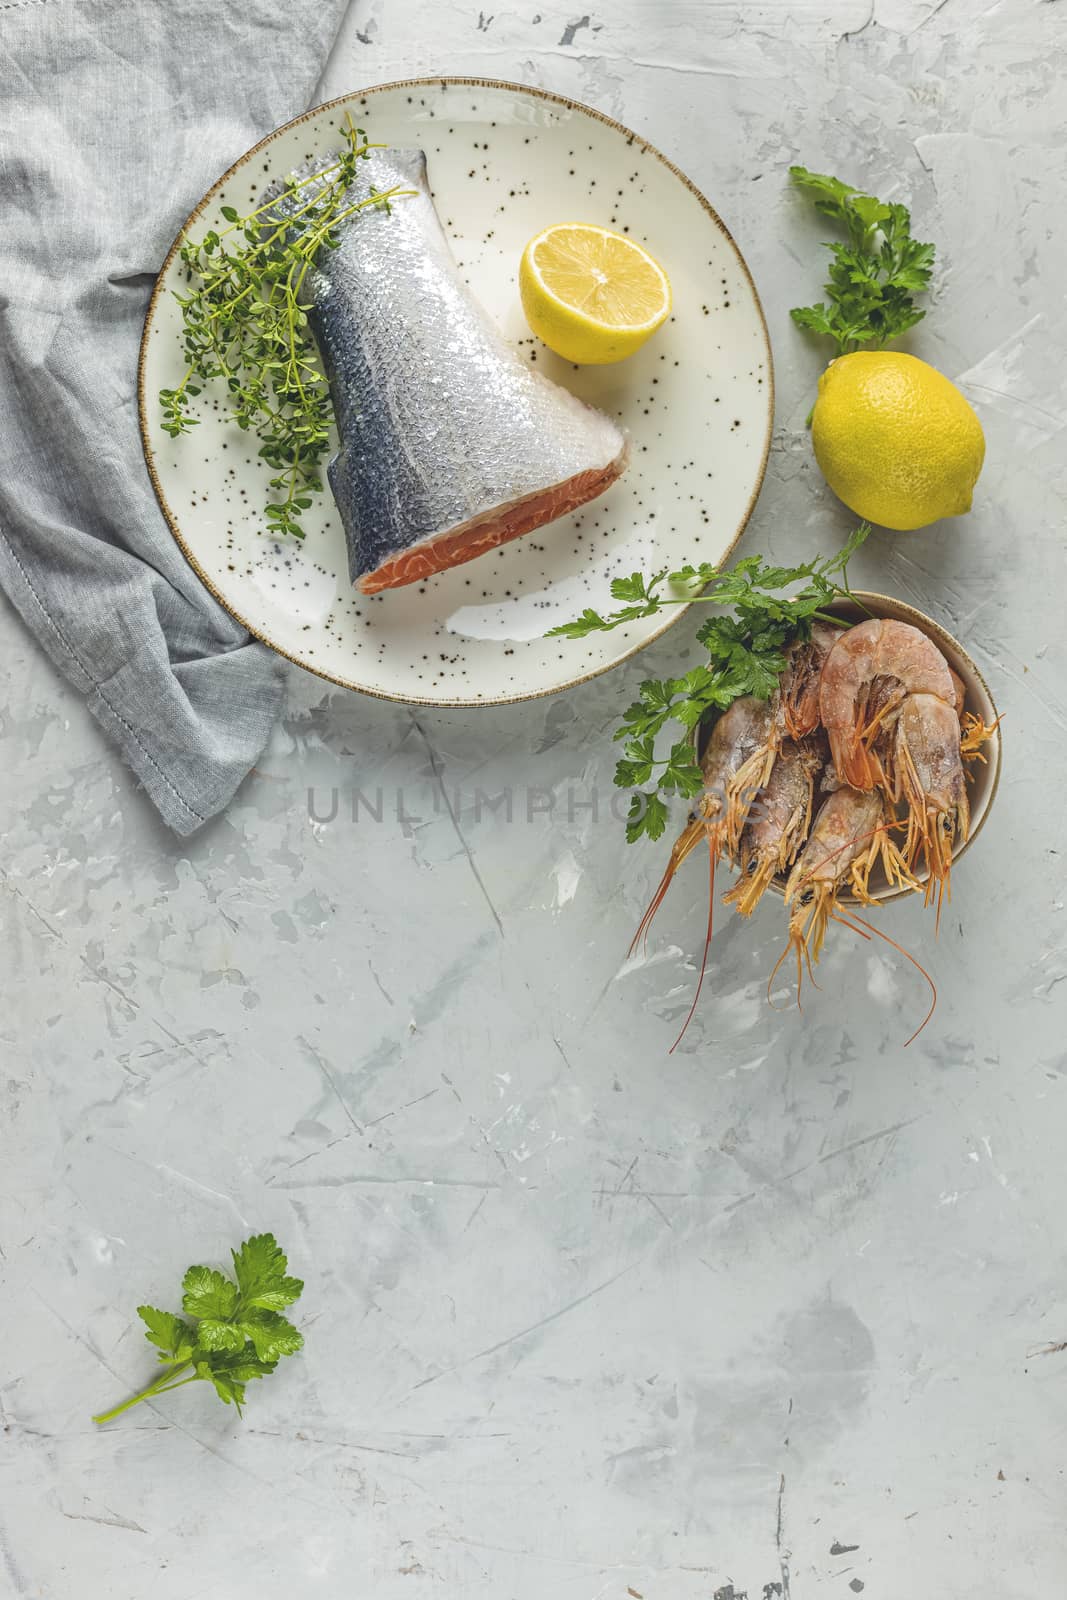 Trout fish  surrounded parsley, lemon, shrimp, prawn in ceramic plate. Light gray concrete table surface. Healthy seafood background.